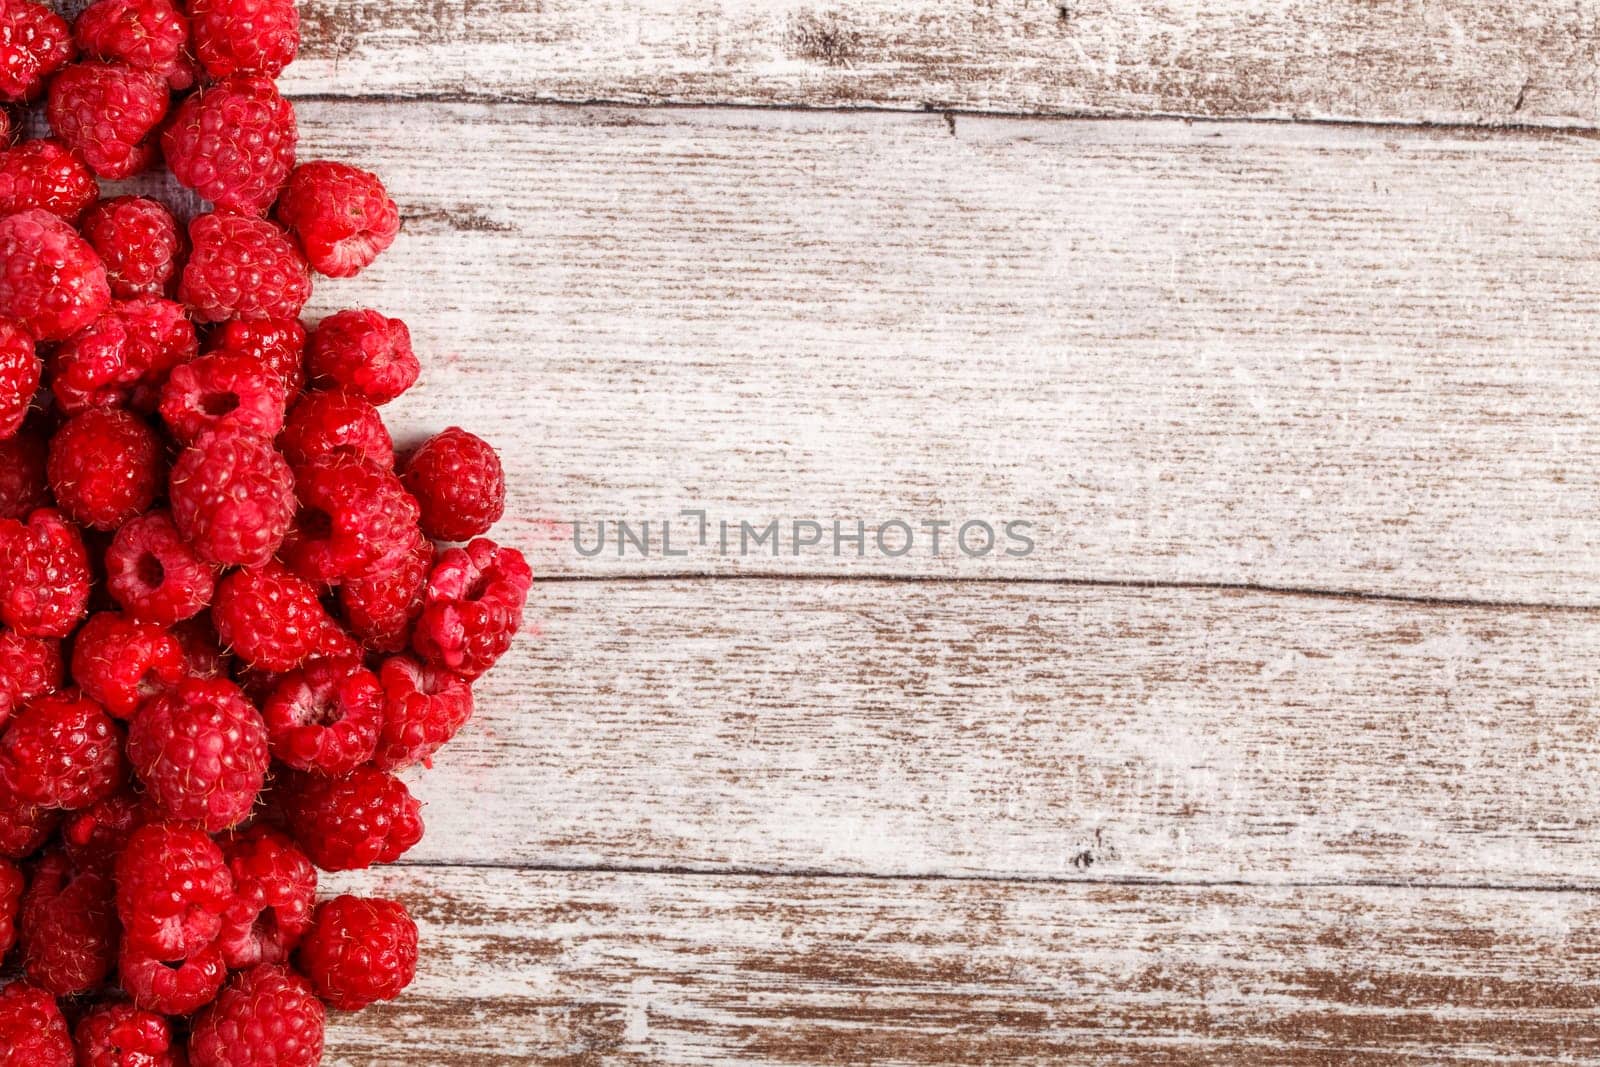 Summer fresh fruits. Raspberry on wooden table. Healthy lifestyle